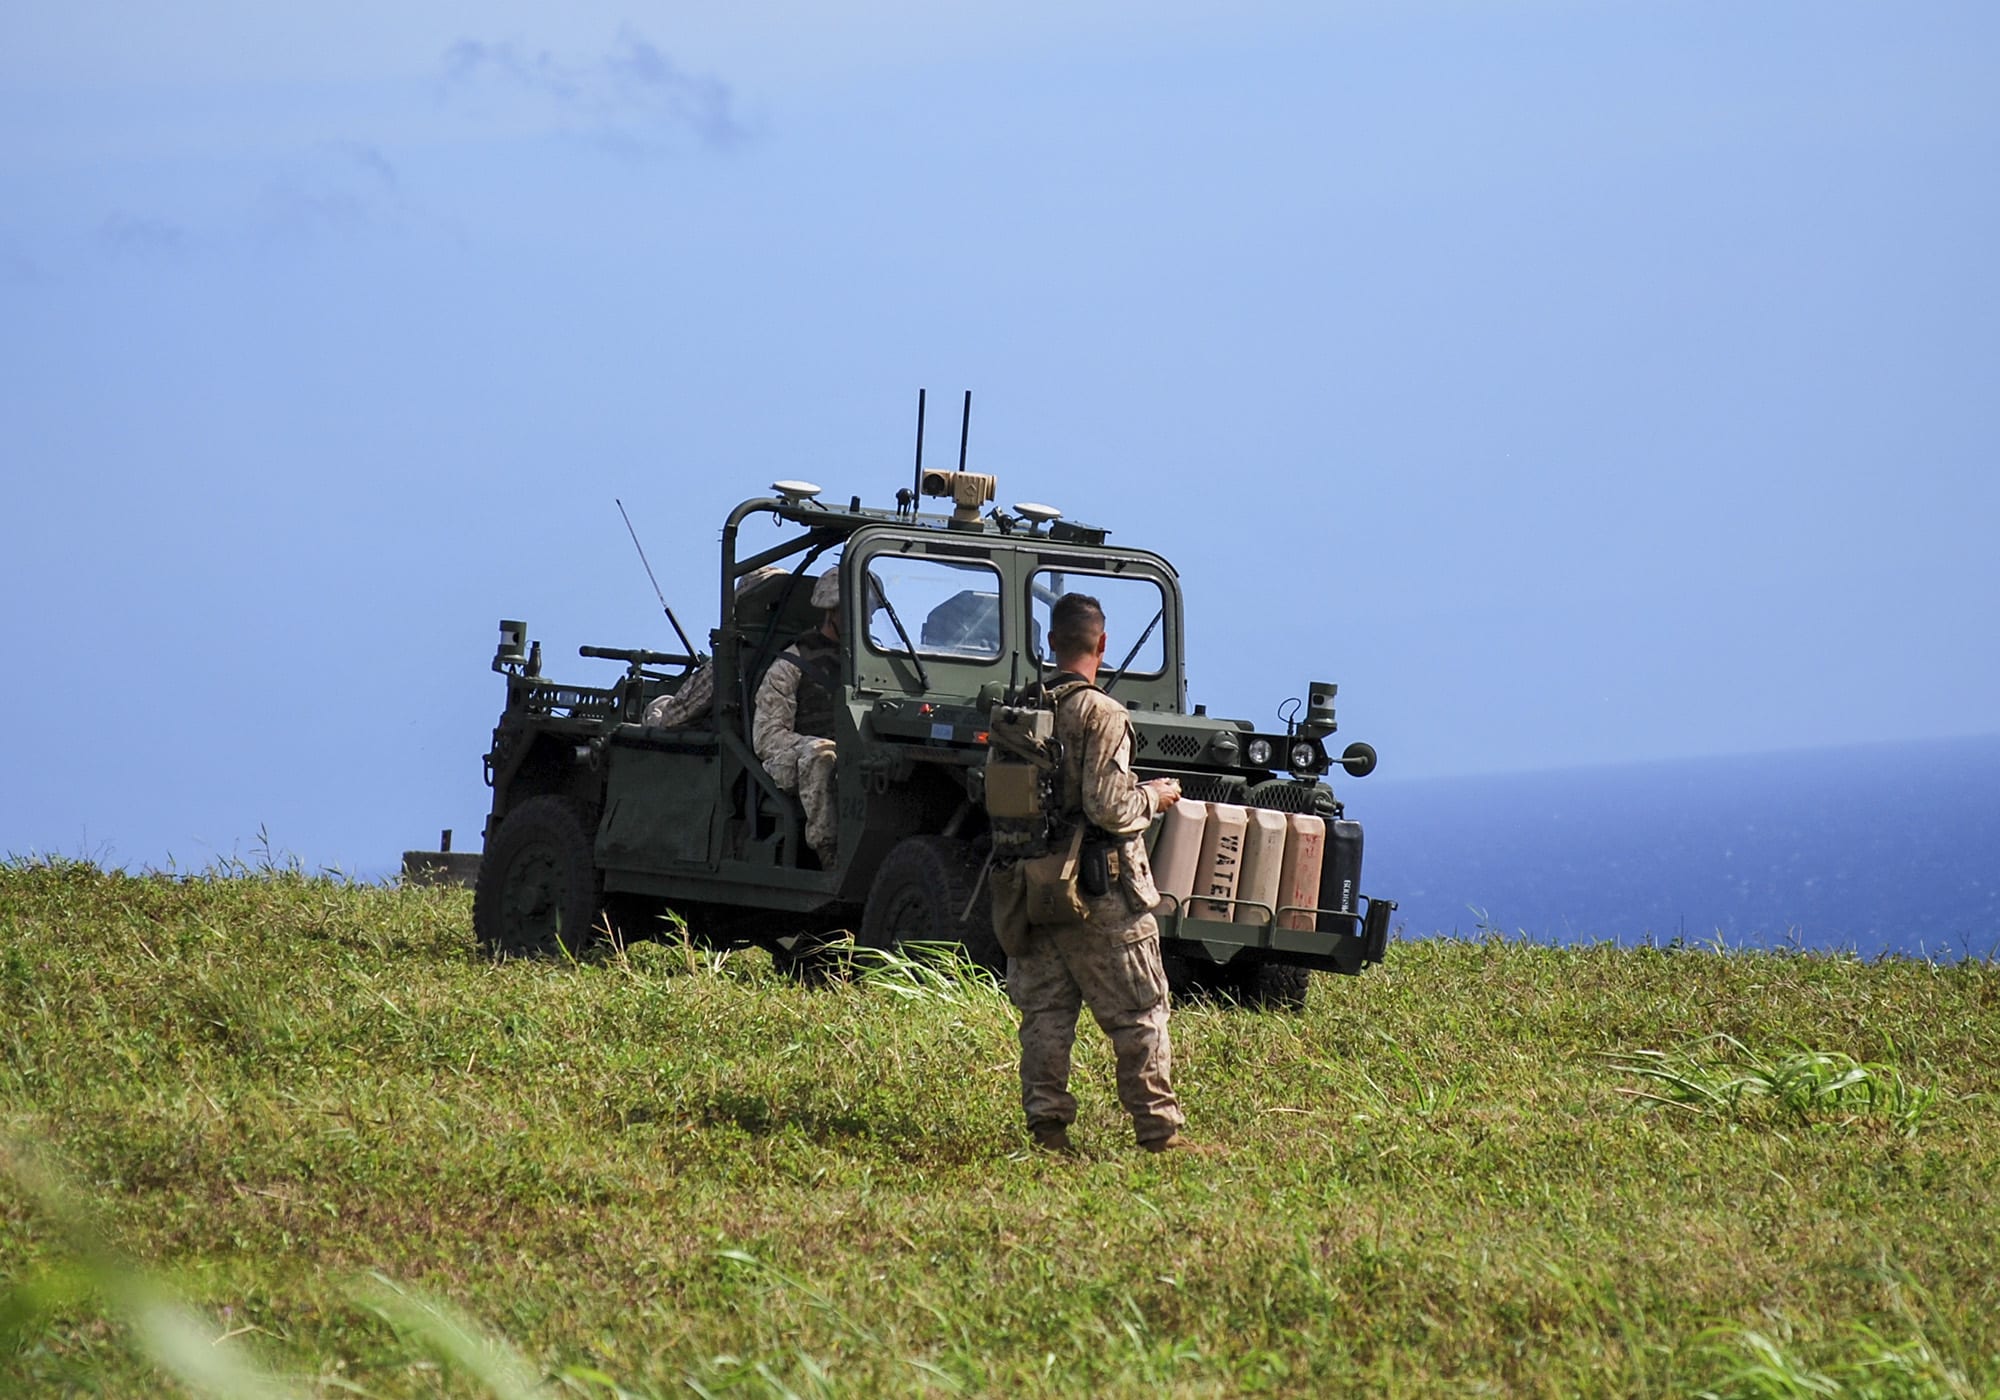 Soldiers working with a unmanned vehicle The Ground Unmanned Support Surrogate (GUSS).